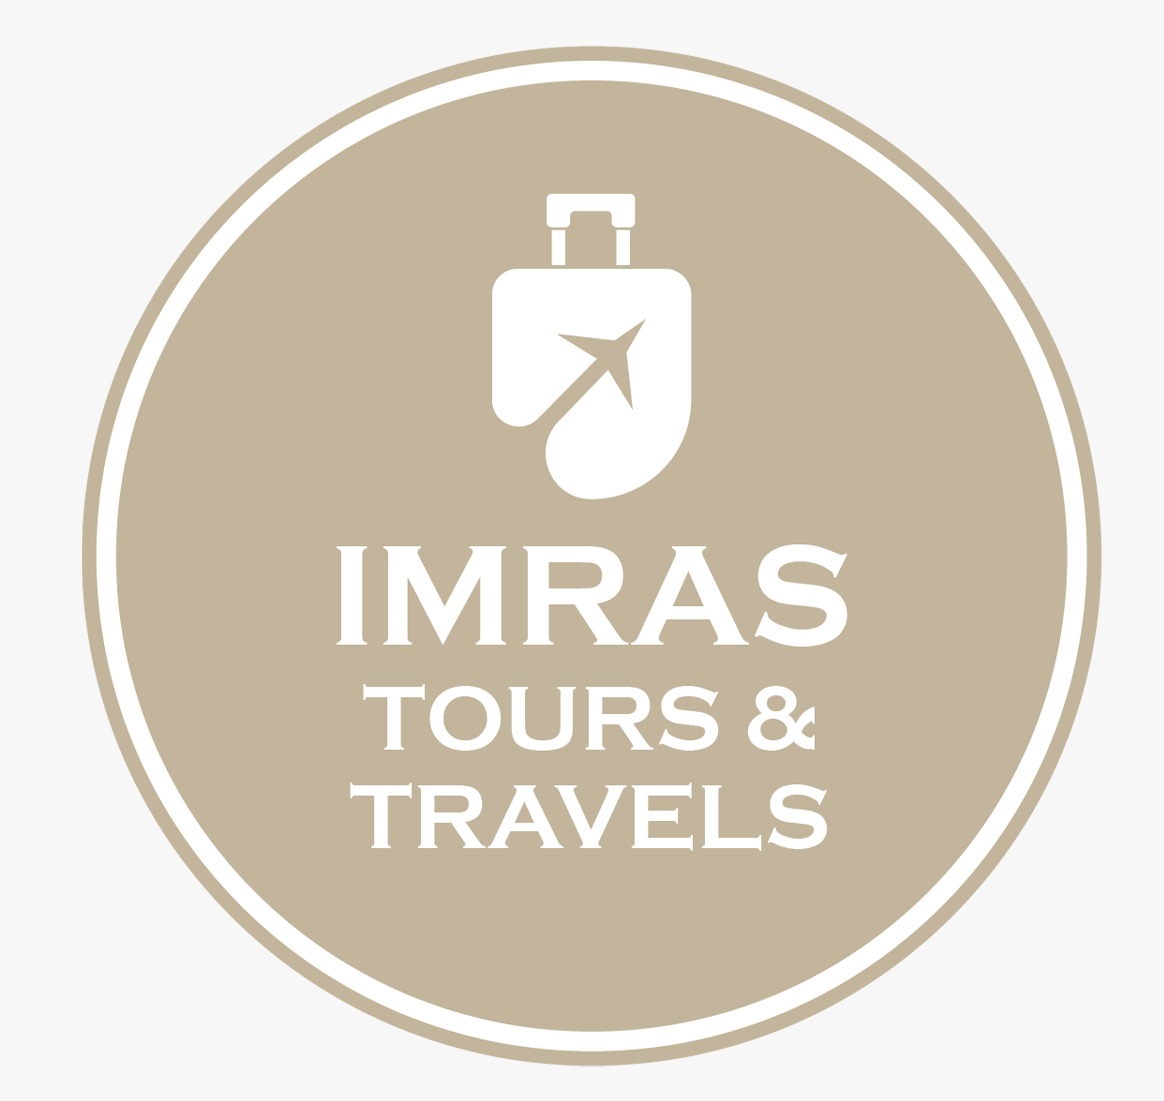 Imras Tours & Travels